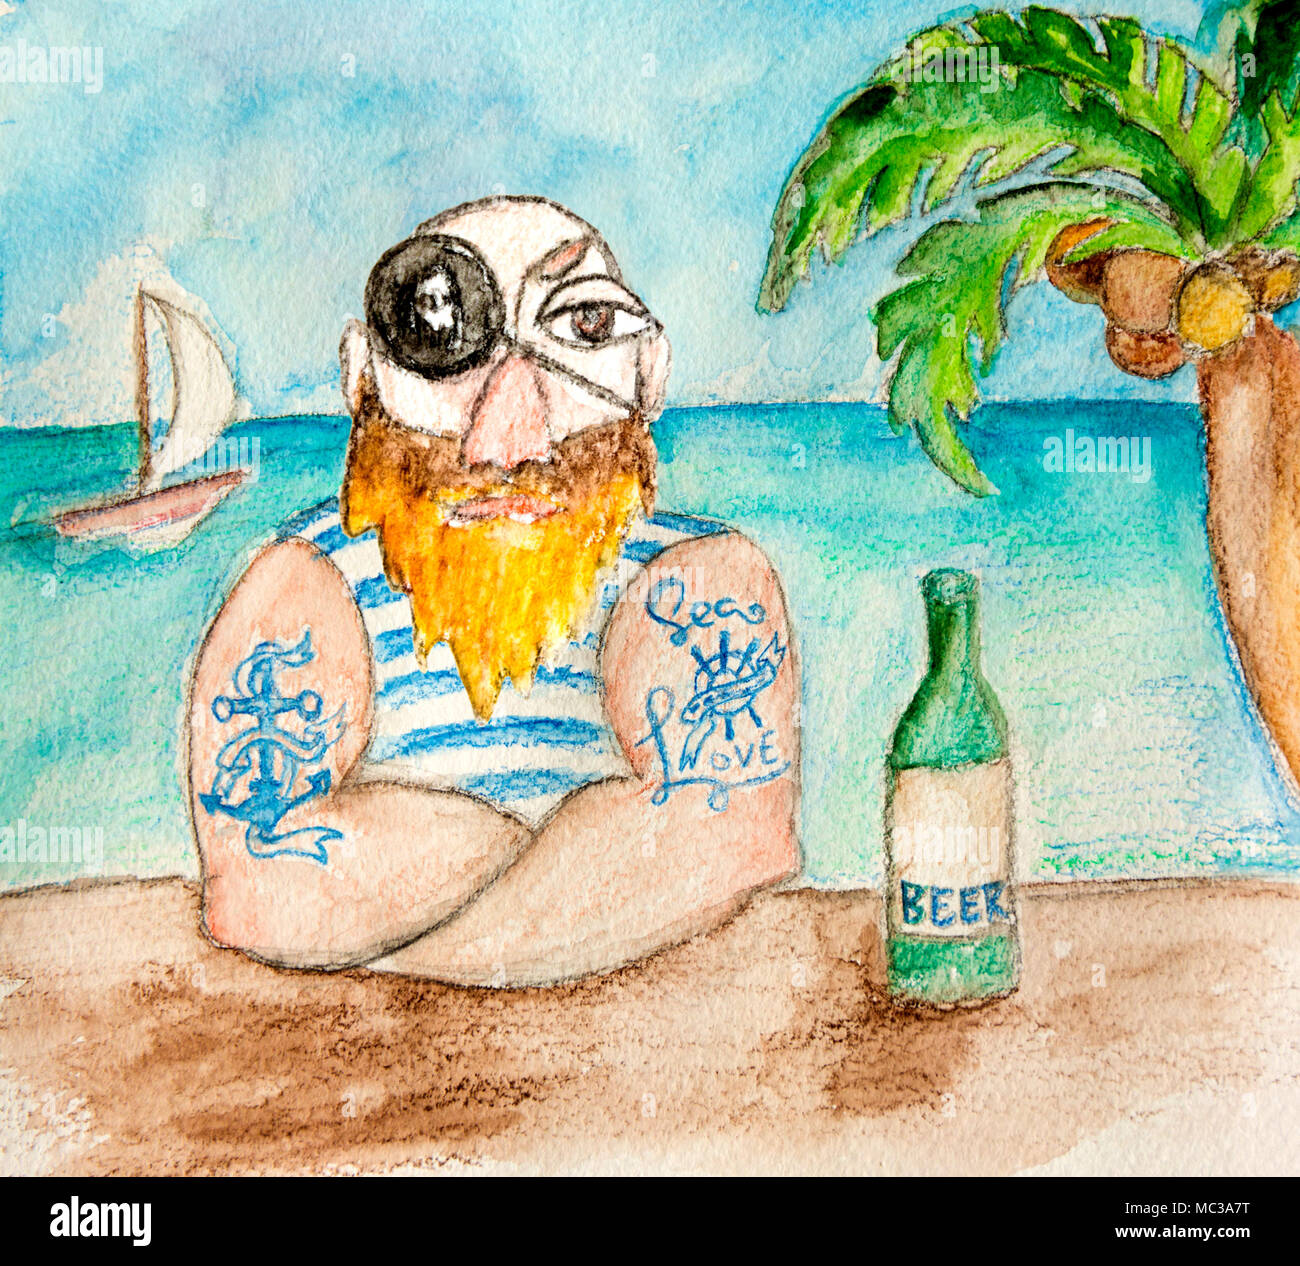 Pirate in the blue striped vest with beer on sea background. Seamen with beard and blue tattoo in beach bar. Hand drawn illustration. Stock Photo